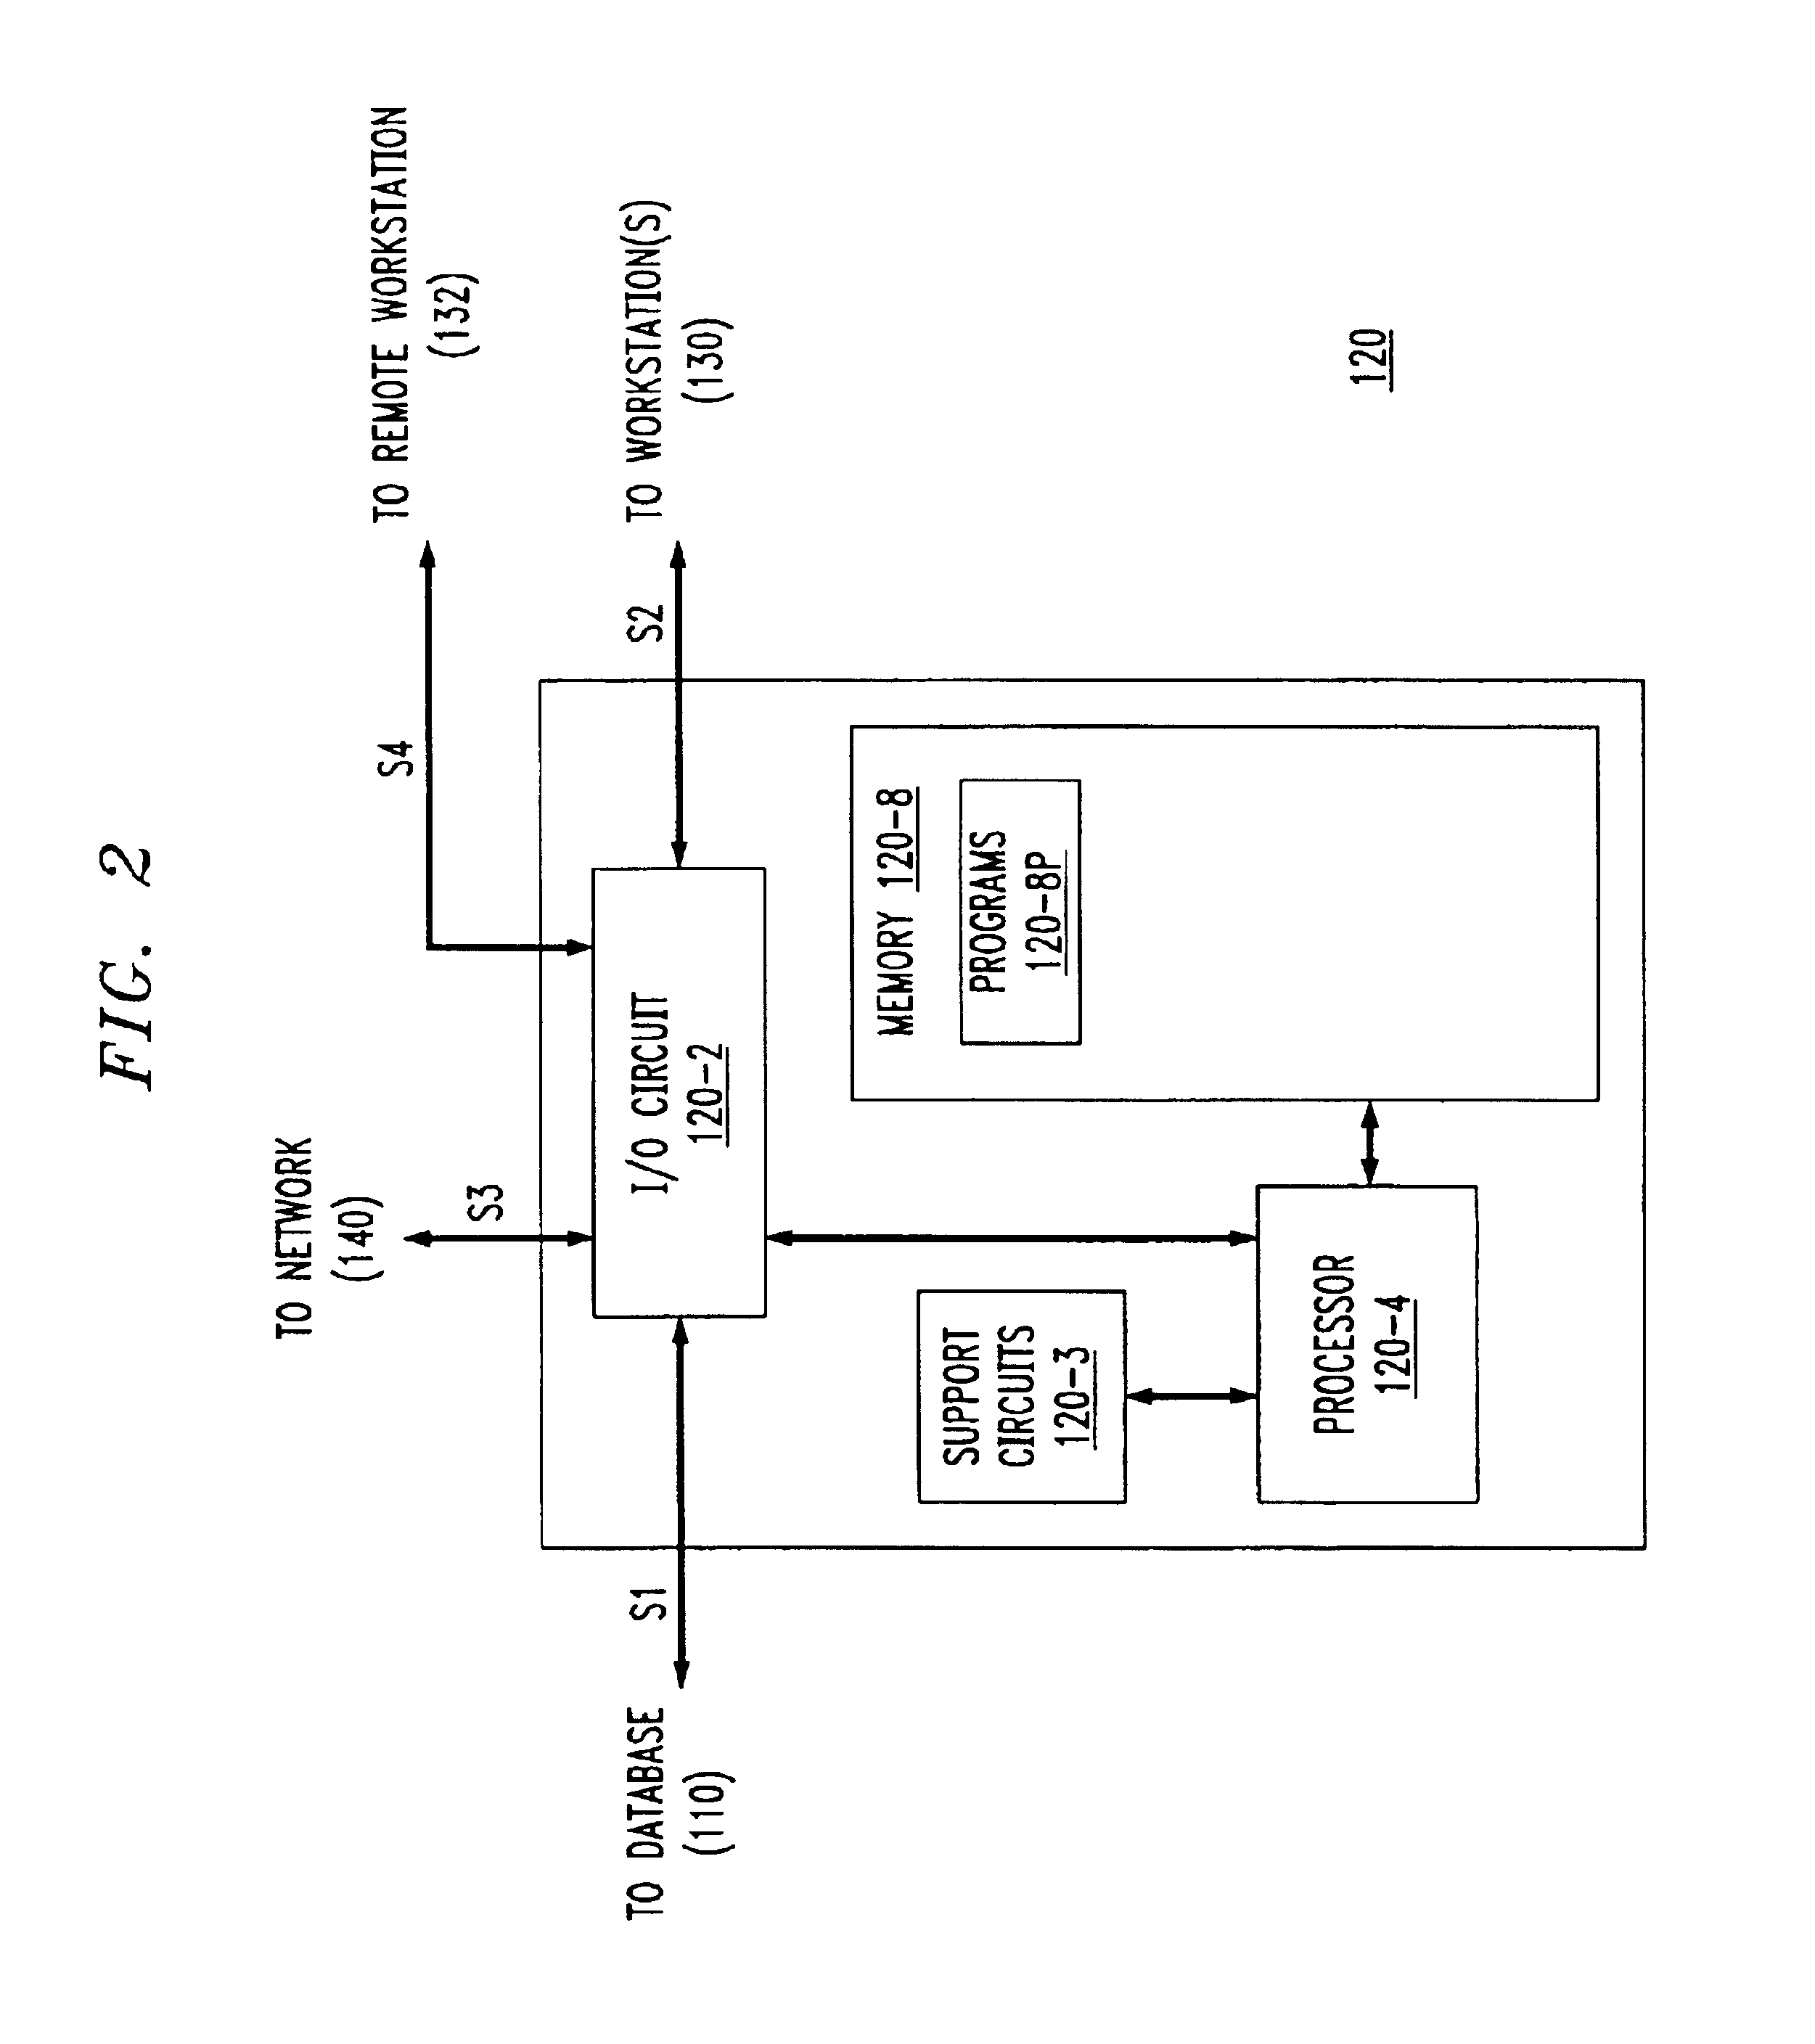 Method and apparatus for optimizing routing through network nodes